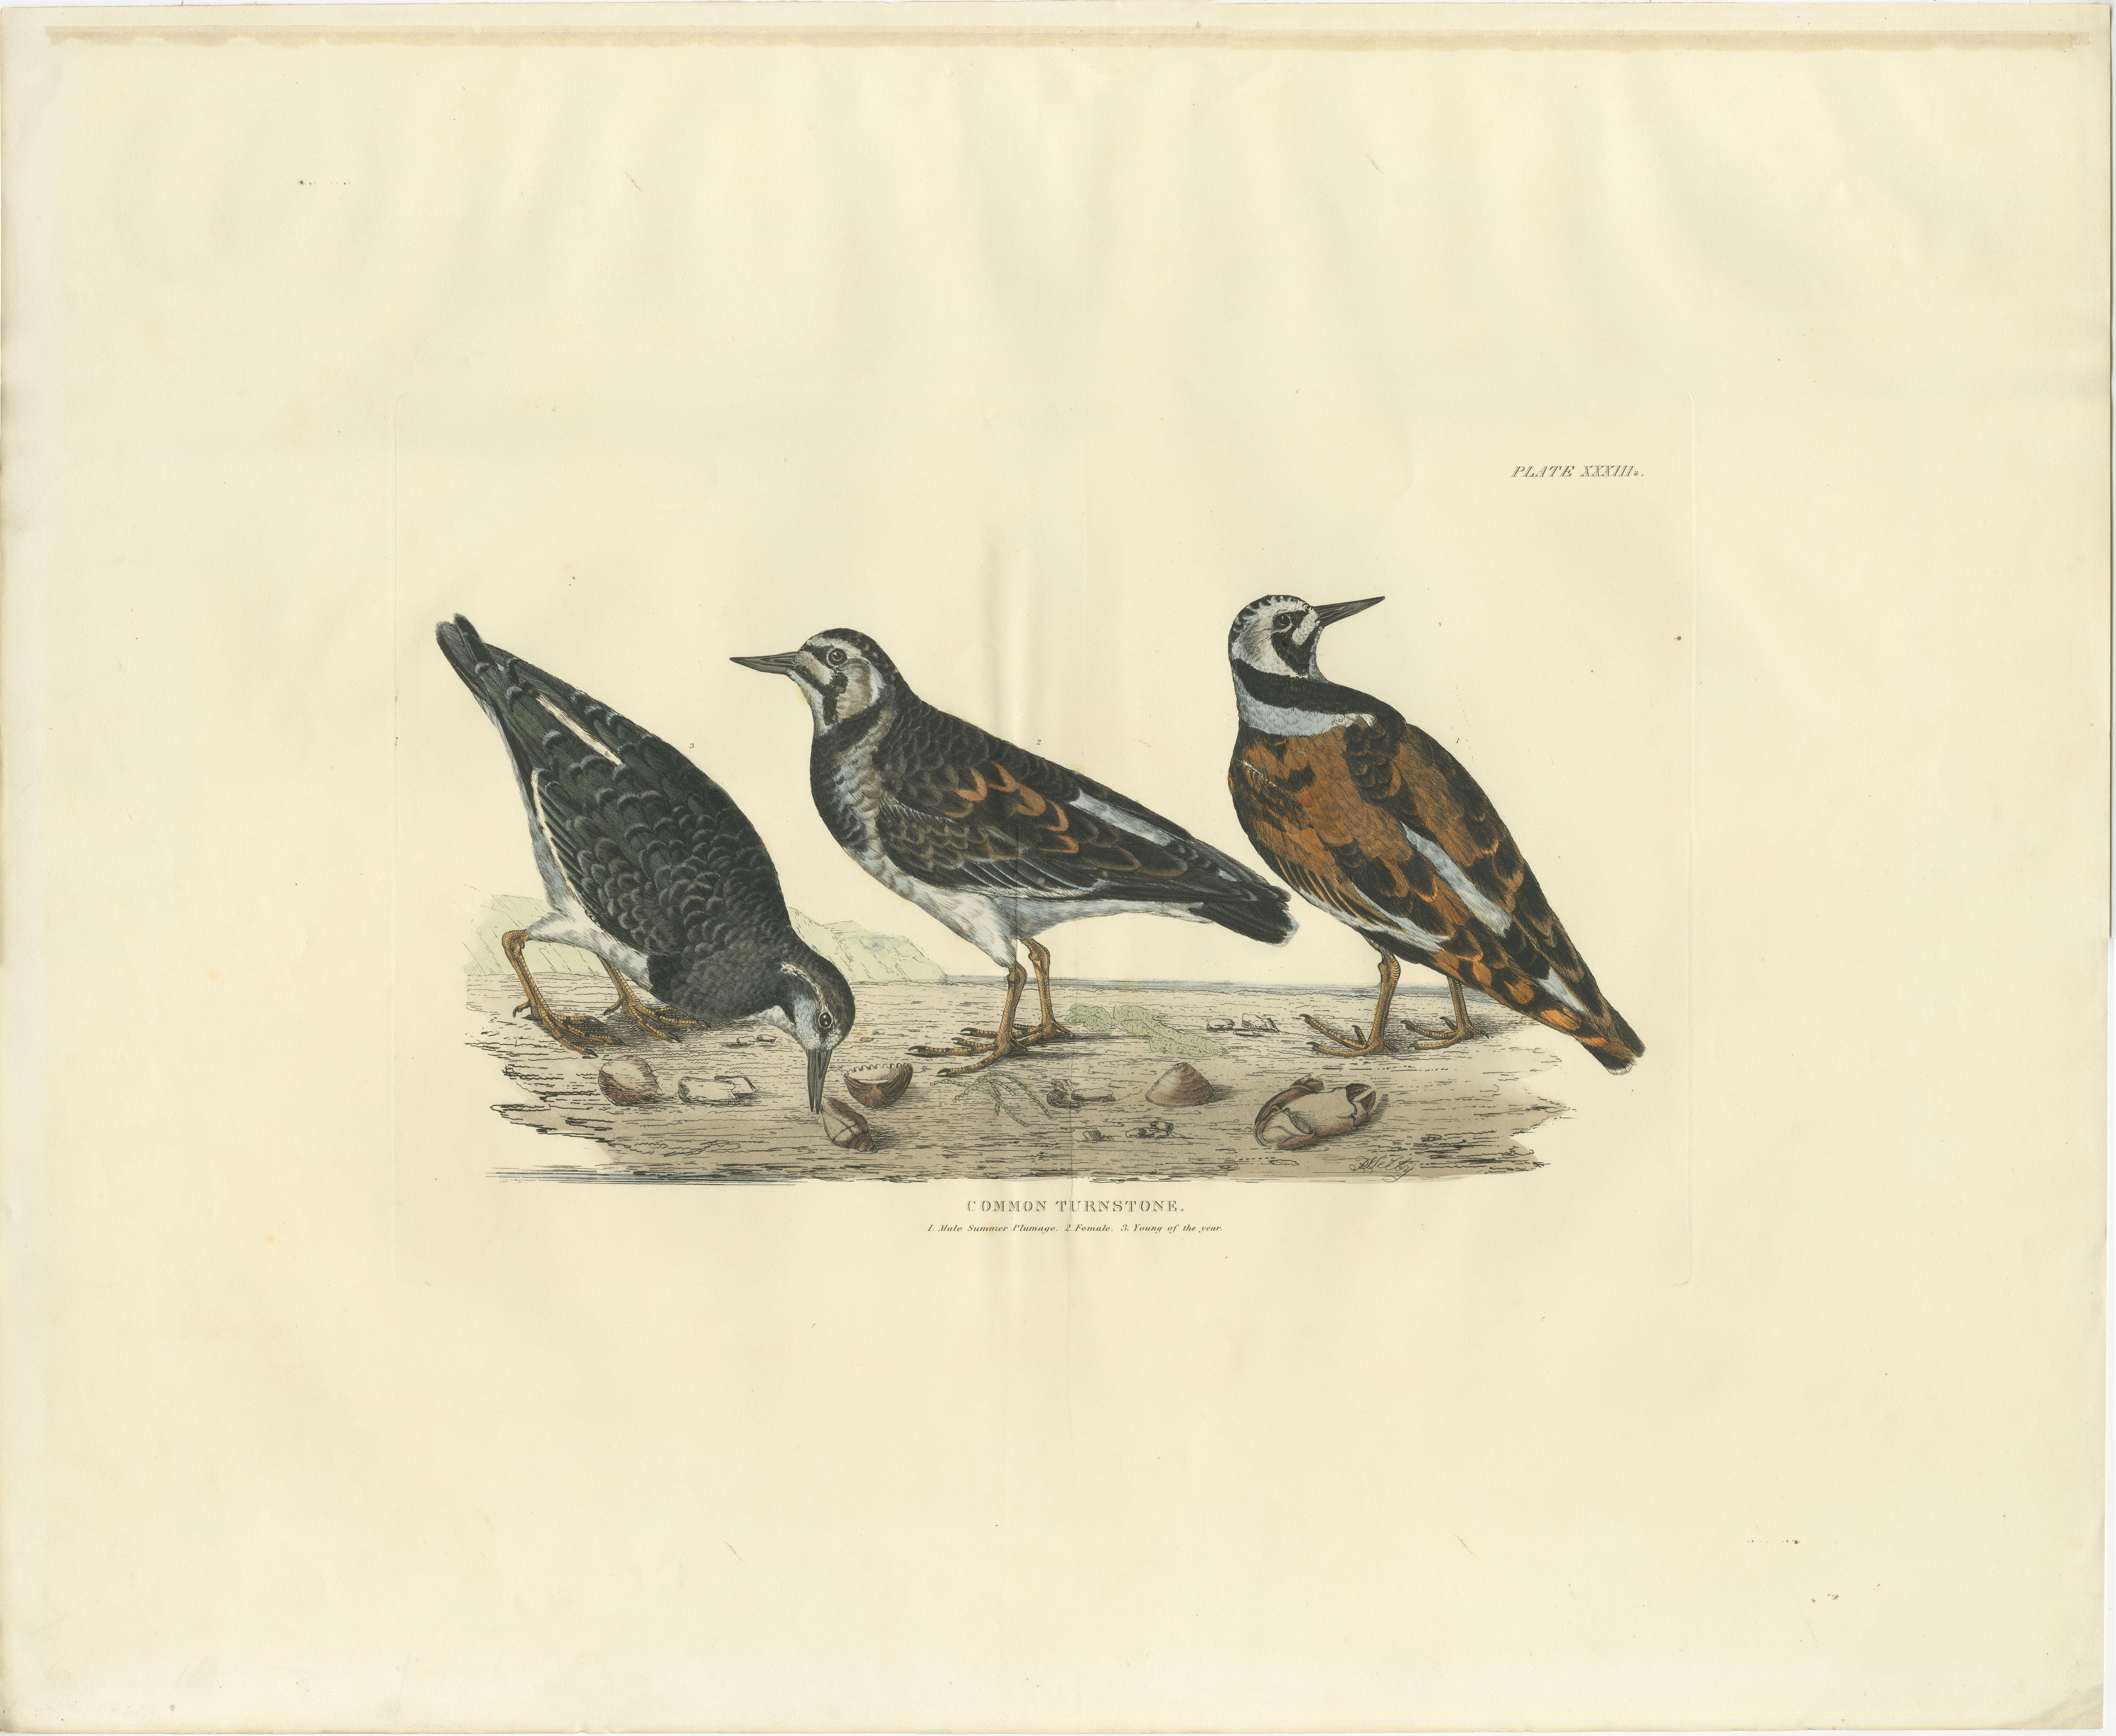 Large original hand-colored antique ornithological print made by Selby and published around 1826. 

The image is a colored etching from 